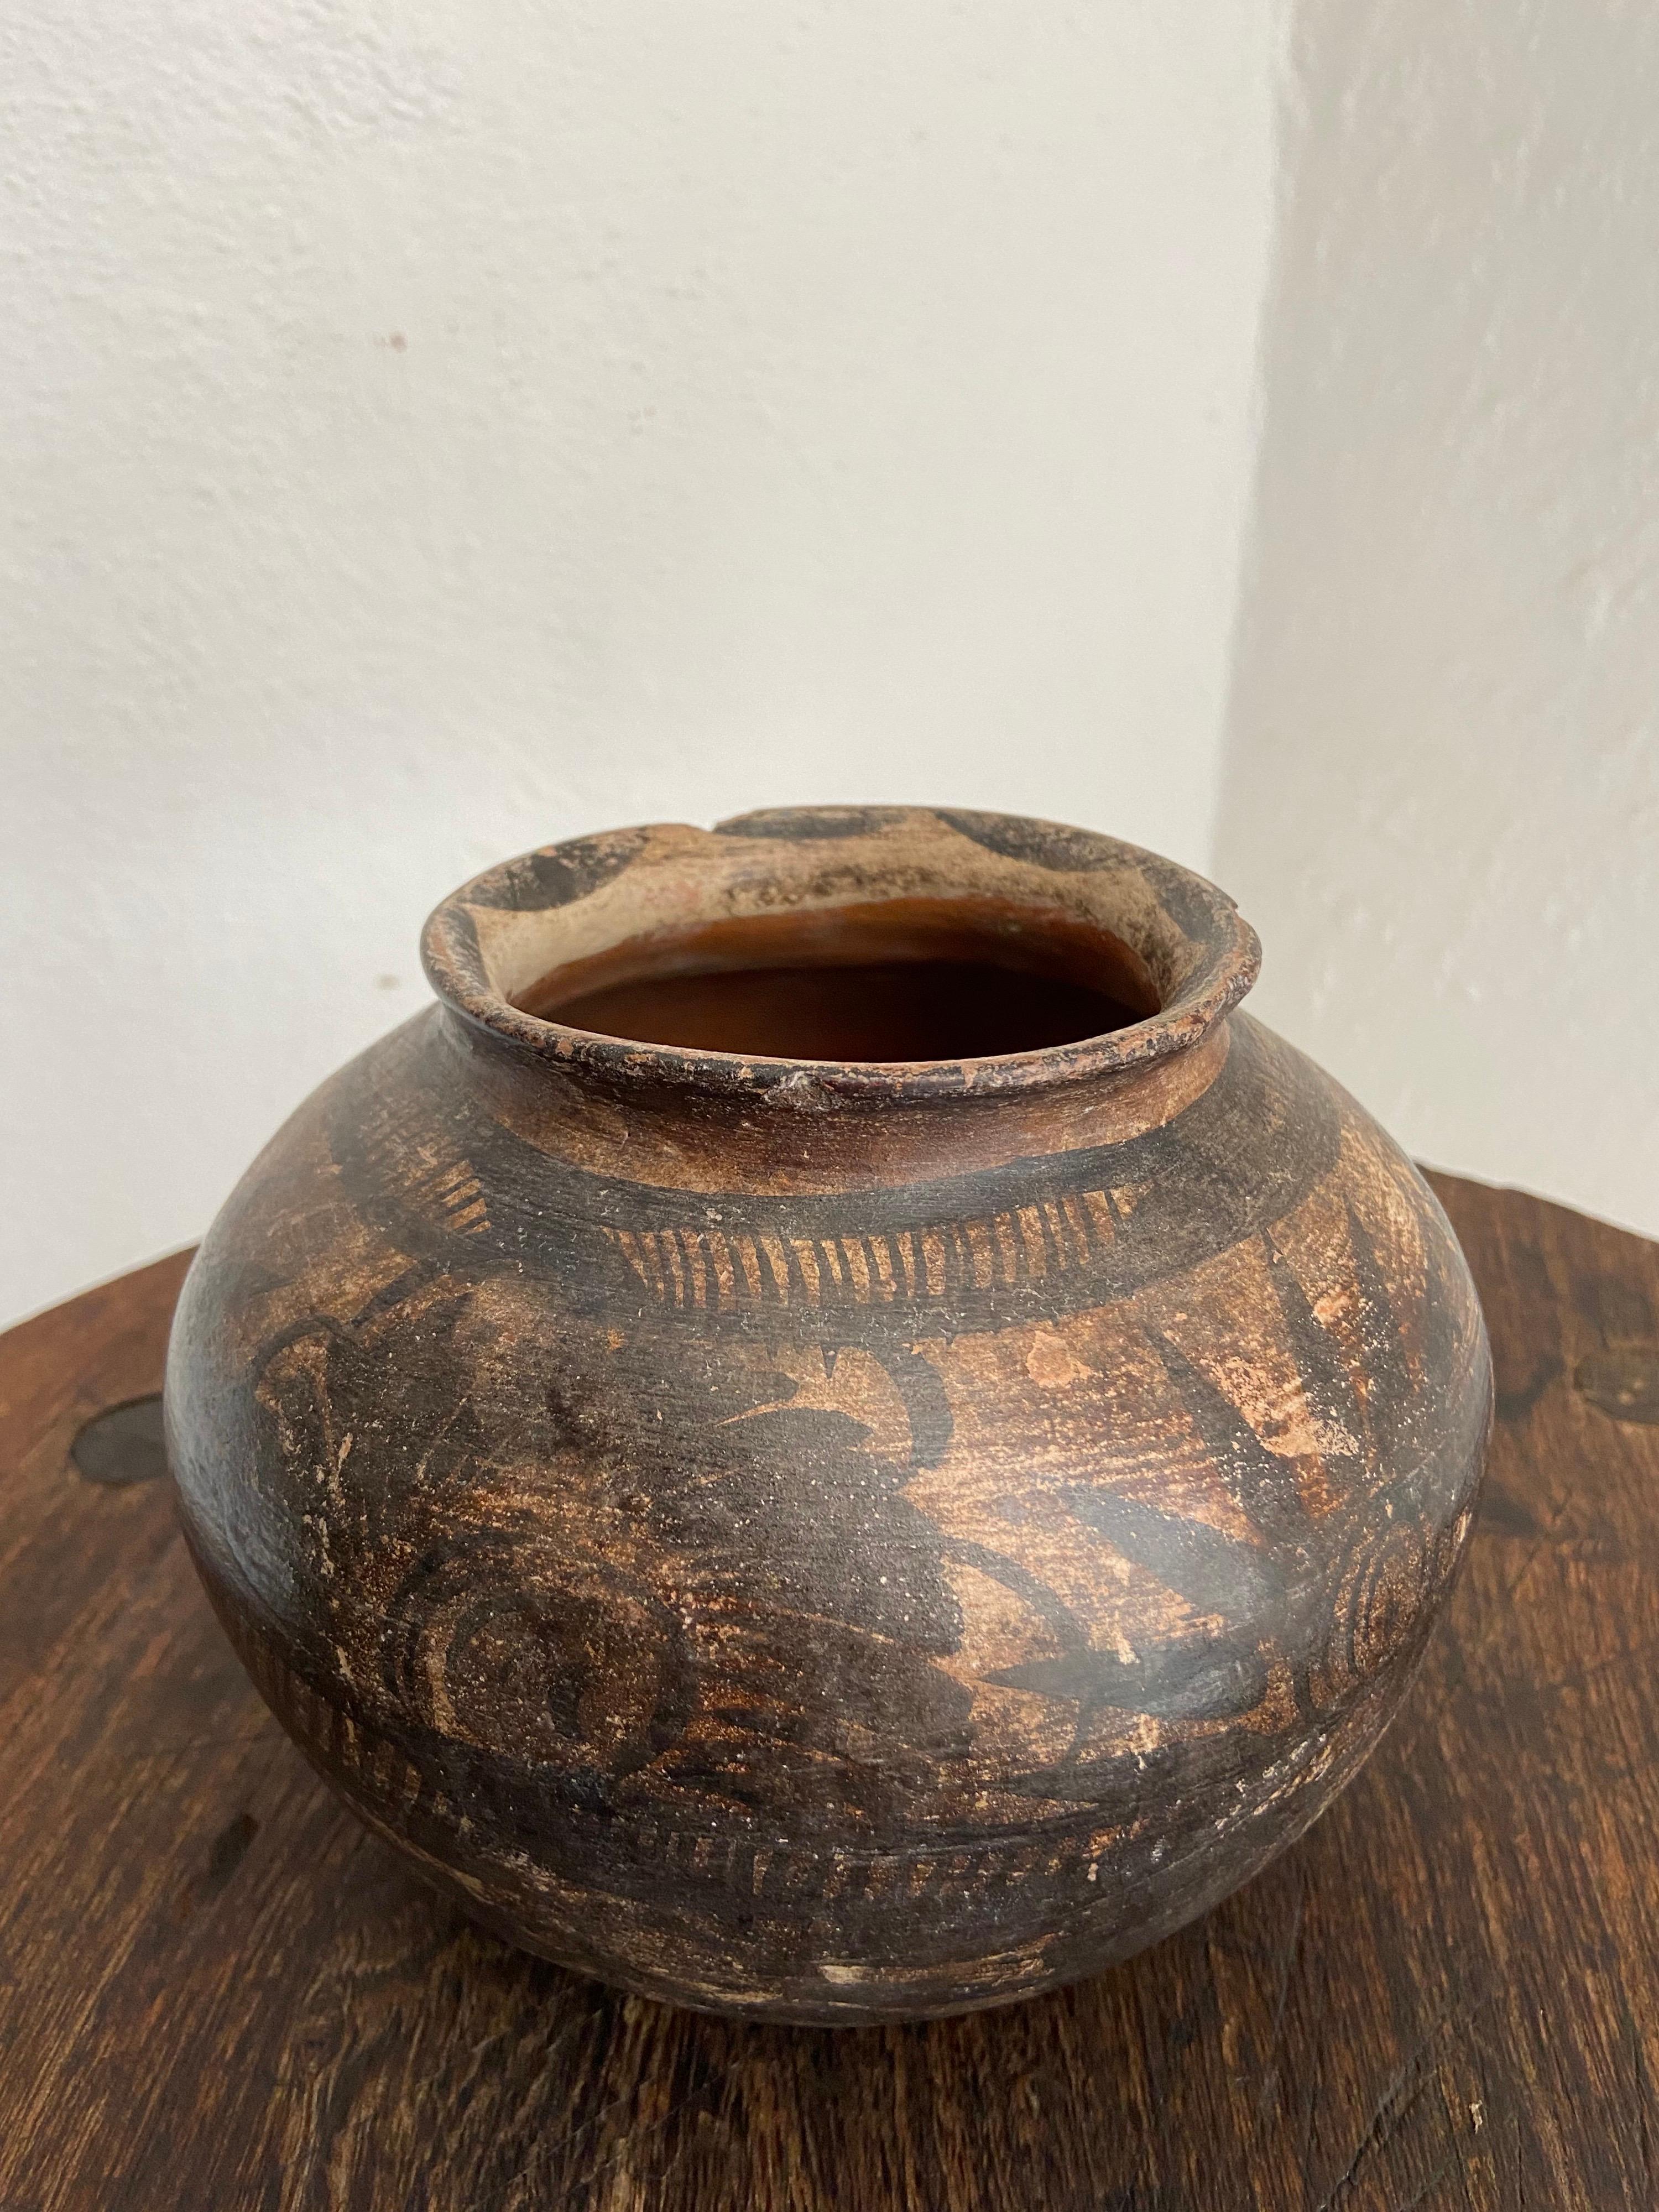 Hand painted pot from Mexico's Huasteca region, circa 1970's. Nahuatl is the indigenous language predominantly spoken in the area. The pot is most likely from the community of Chililico, Hidalgo. These pots are painted using a feather which gives